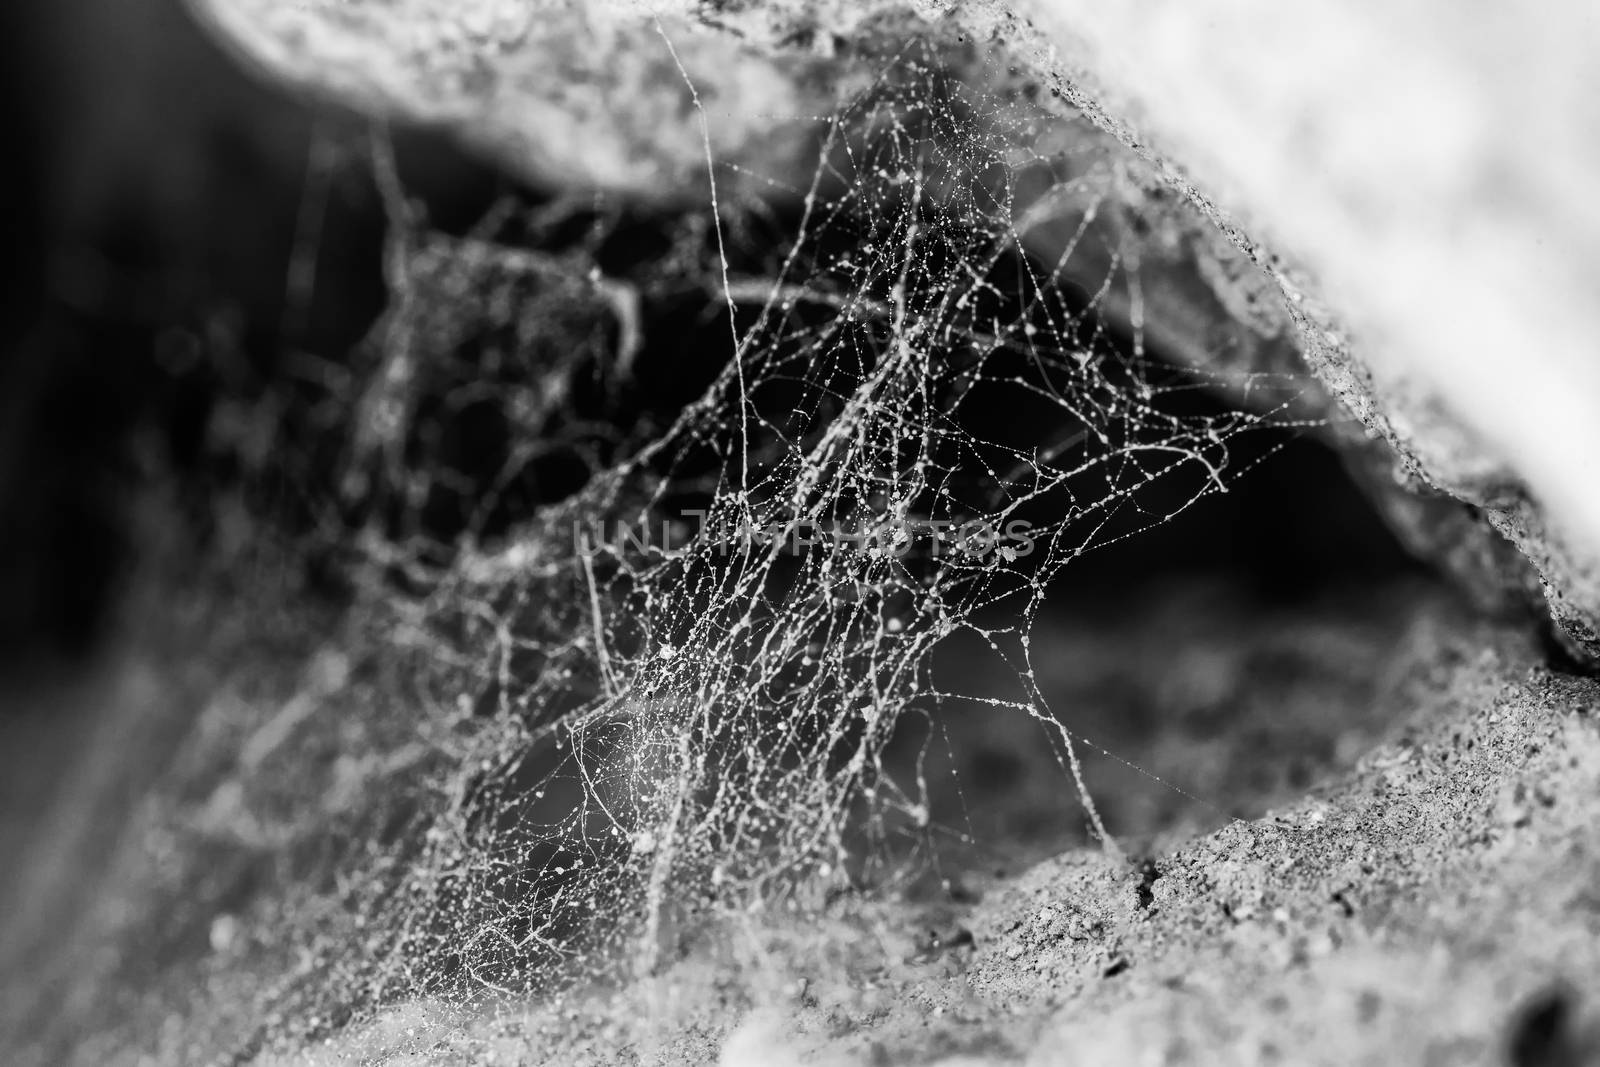 Macro shot of a cobweb with a multitude of sticky strands.